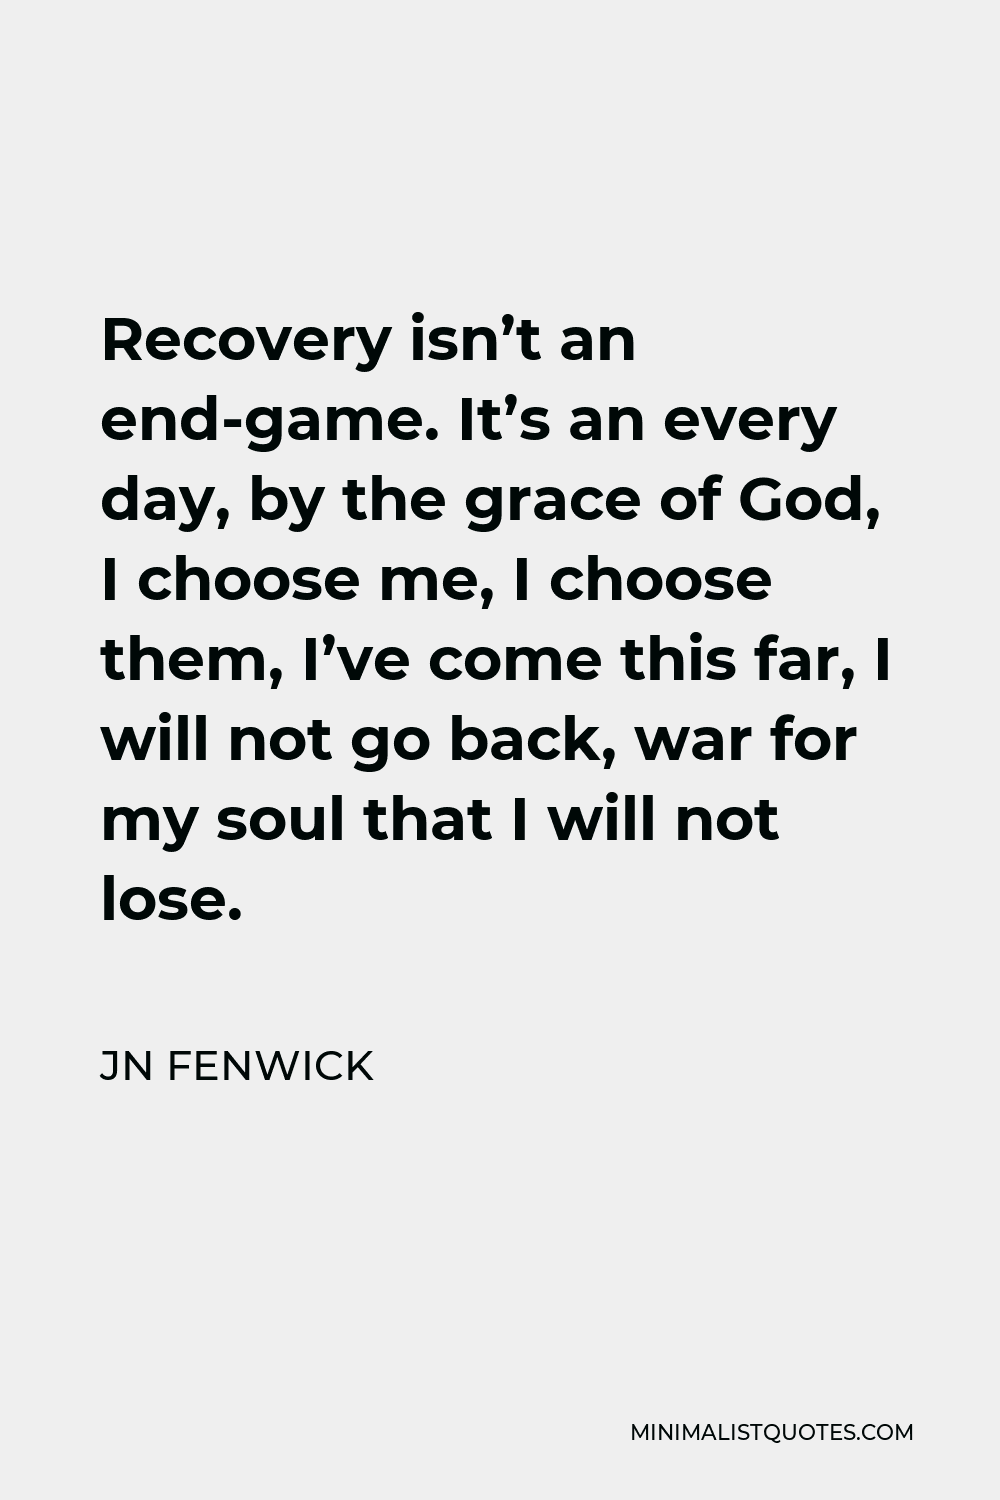 Jn Fenwick Quote Recovery Isn T An End Game It S An Every Day By The Grace Of God I Choose Me I Choose Them I Ve Come This Far I Will Not Go Back War